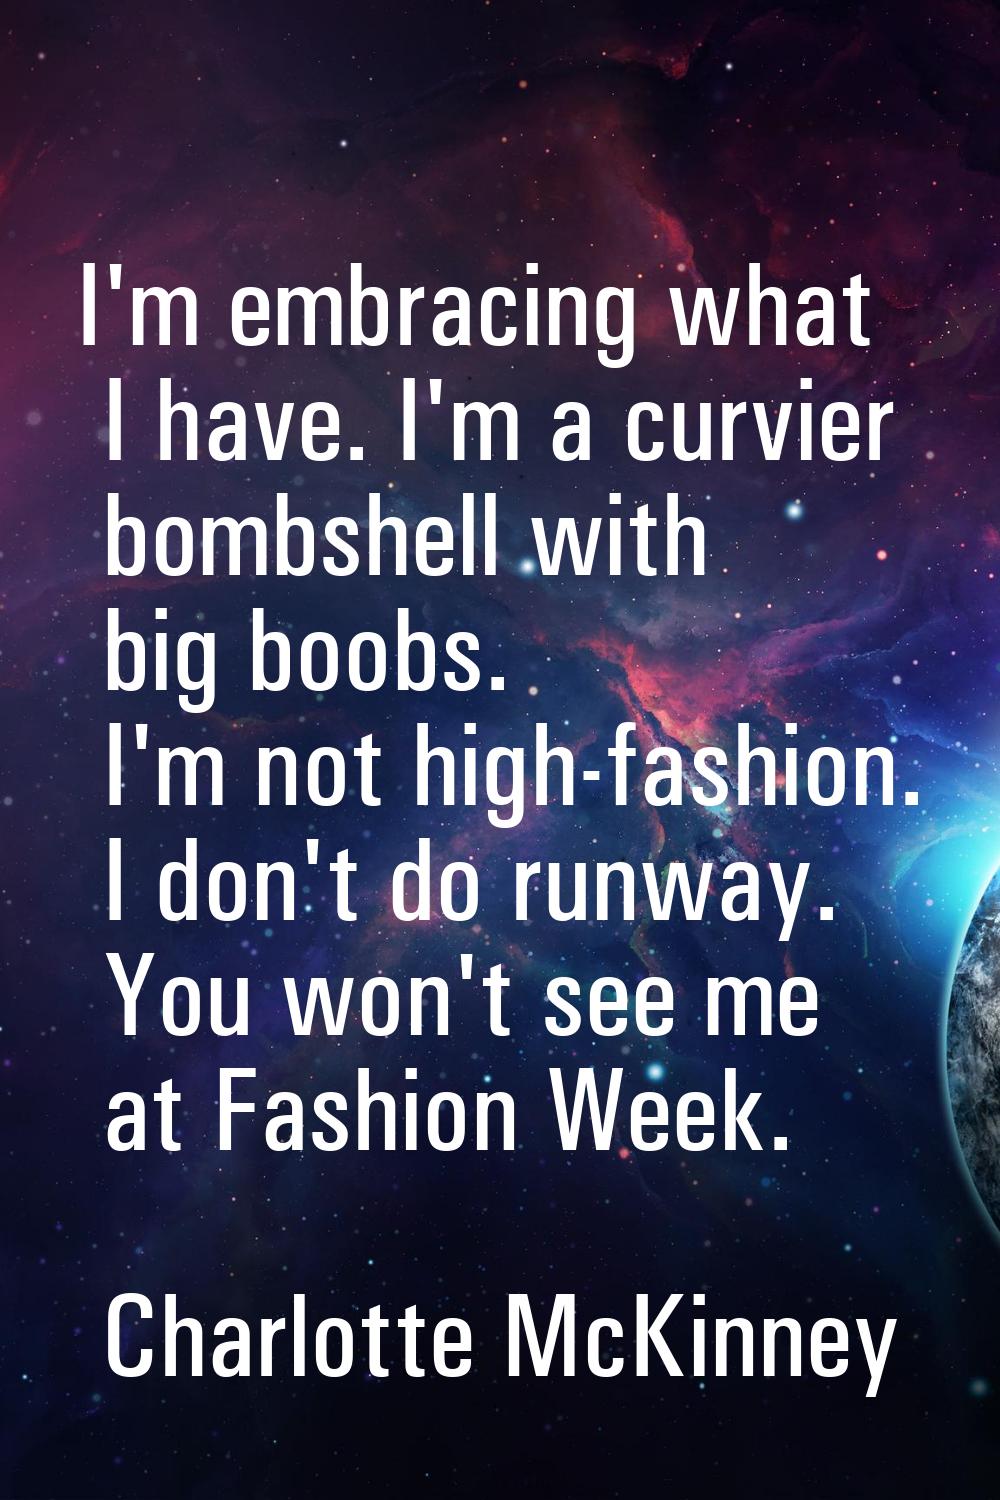 I'm embracing what I have. I'm a curvier bombshell with big boobs. I'm not high-fashion. I don't do